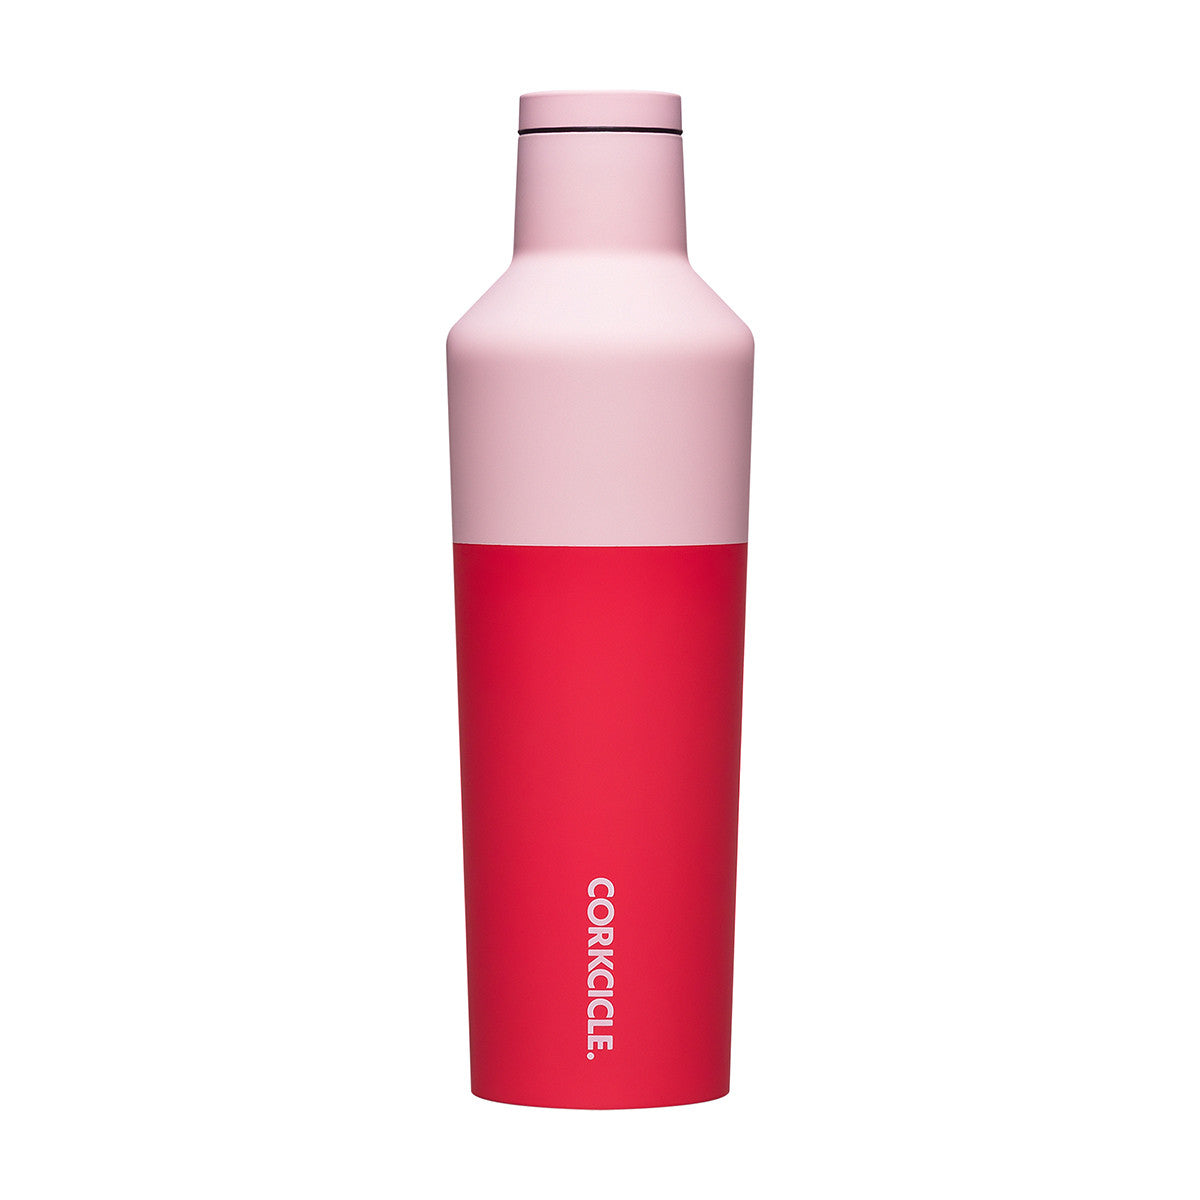 Corkcicle Colour Block Canteen 475ml - Shortcake Insulated Stainless Steel Drink Bottle